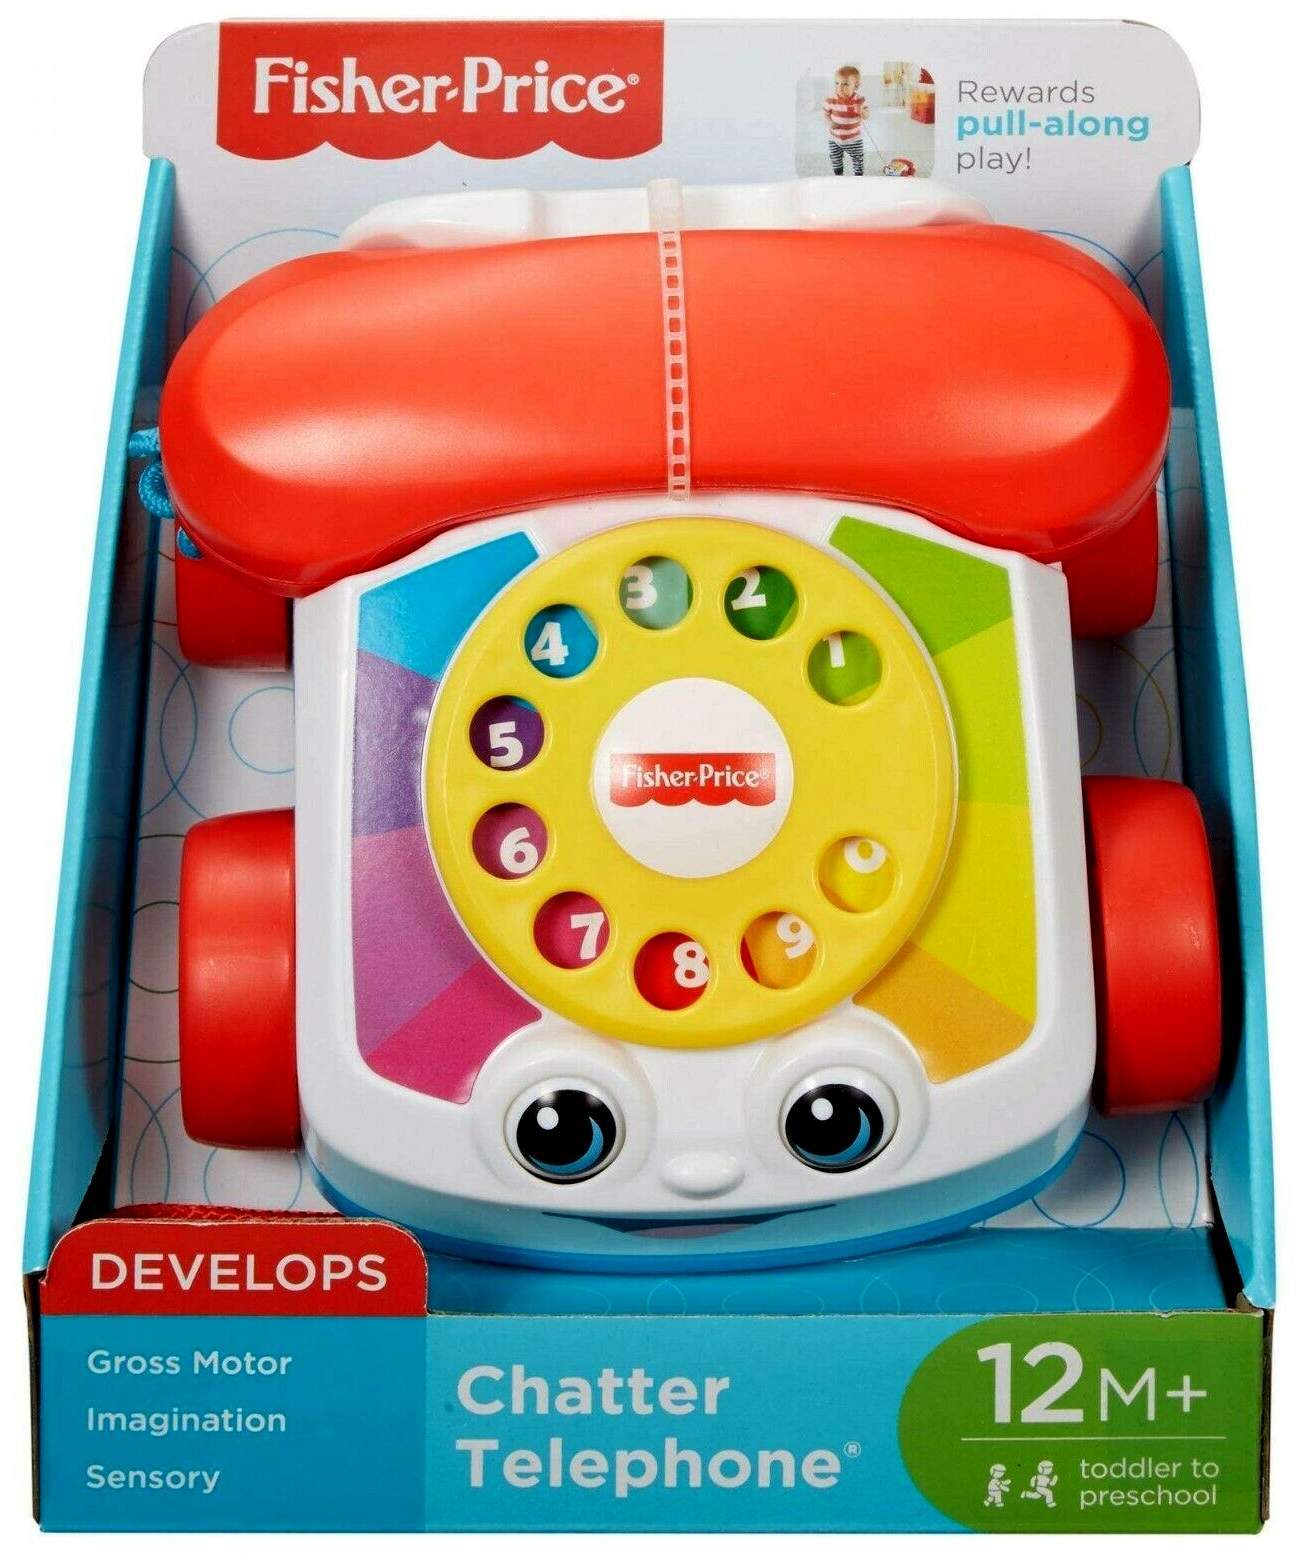 The Fisher-Price Chatter Telephone: Now powered by more than Imagination! –  Global Toy News